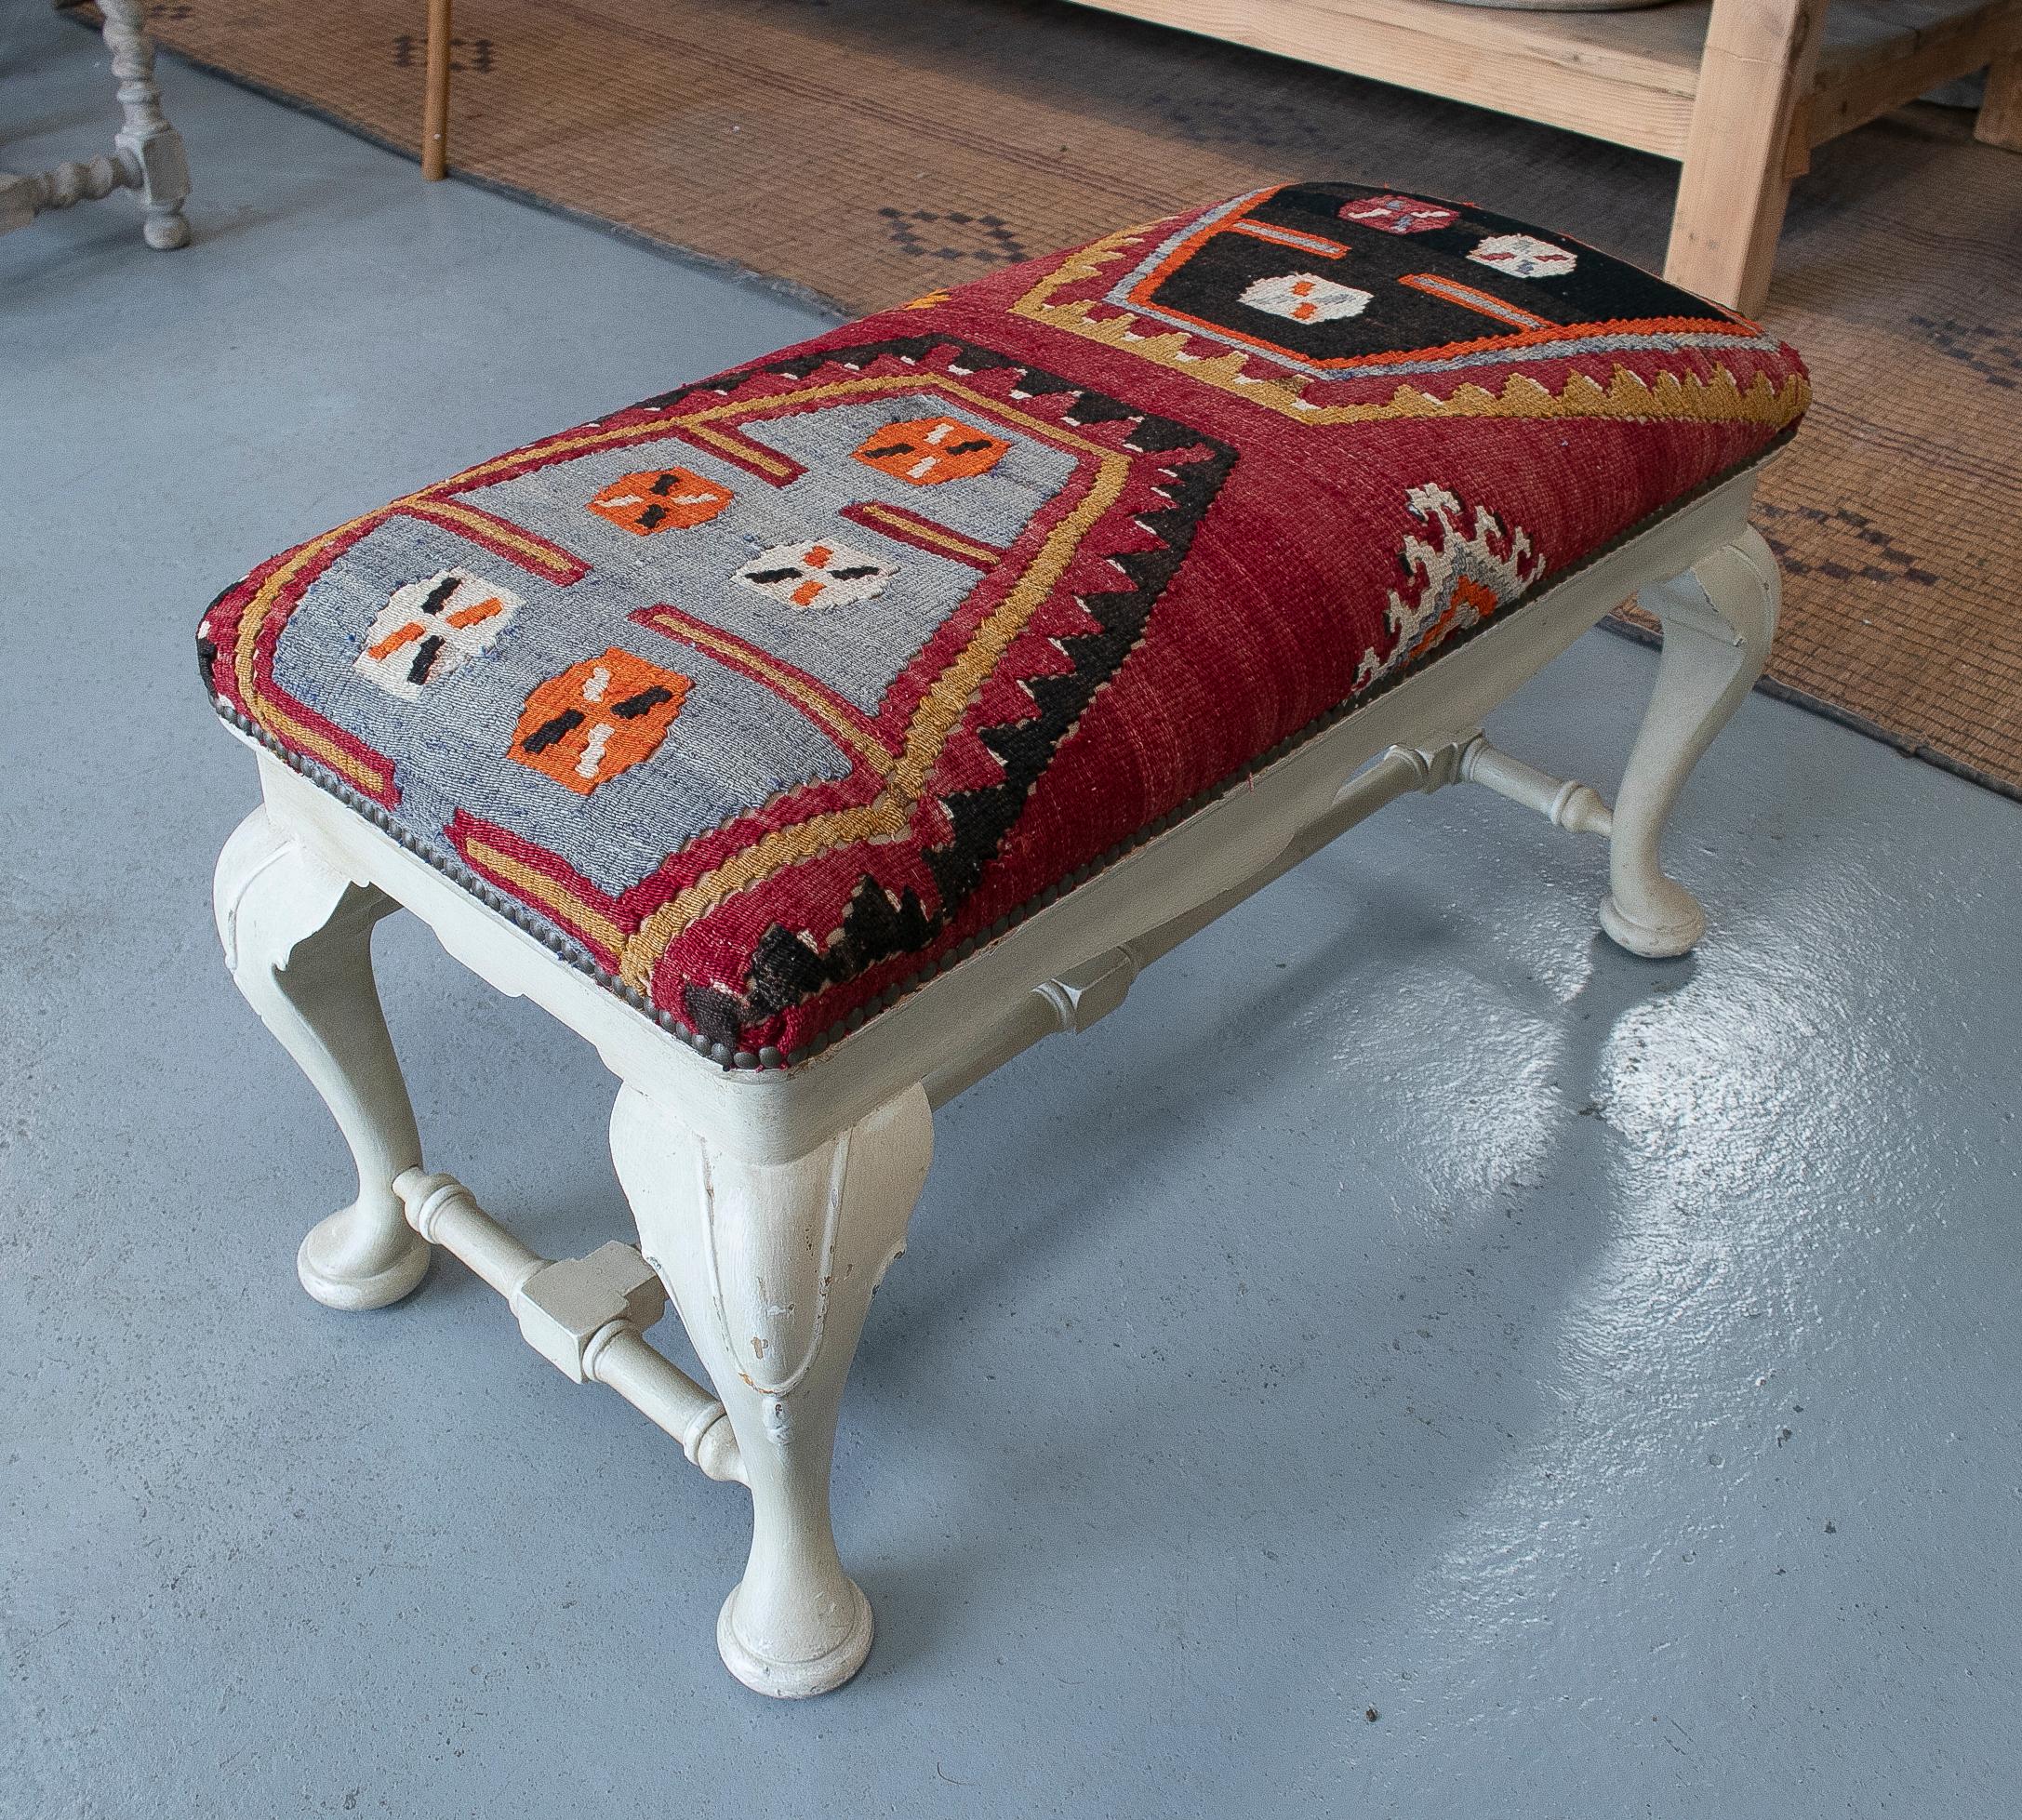 20th Century Vintage 1950s Spanish Tapestry-Woven Kilim Upholstered Two-Seat Bench